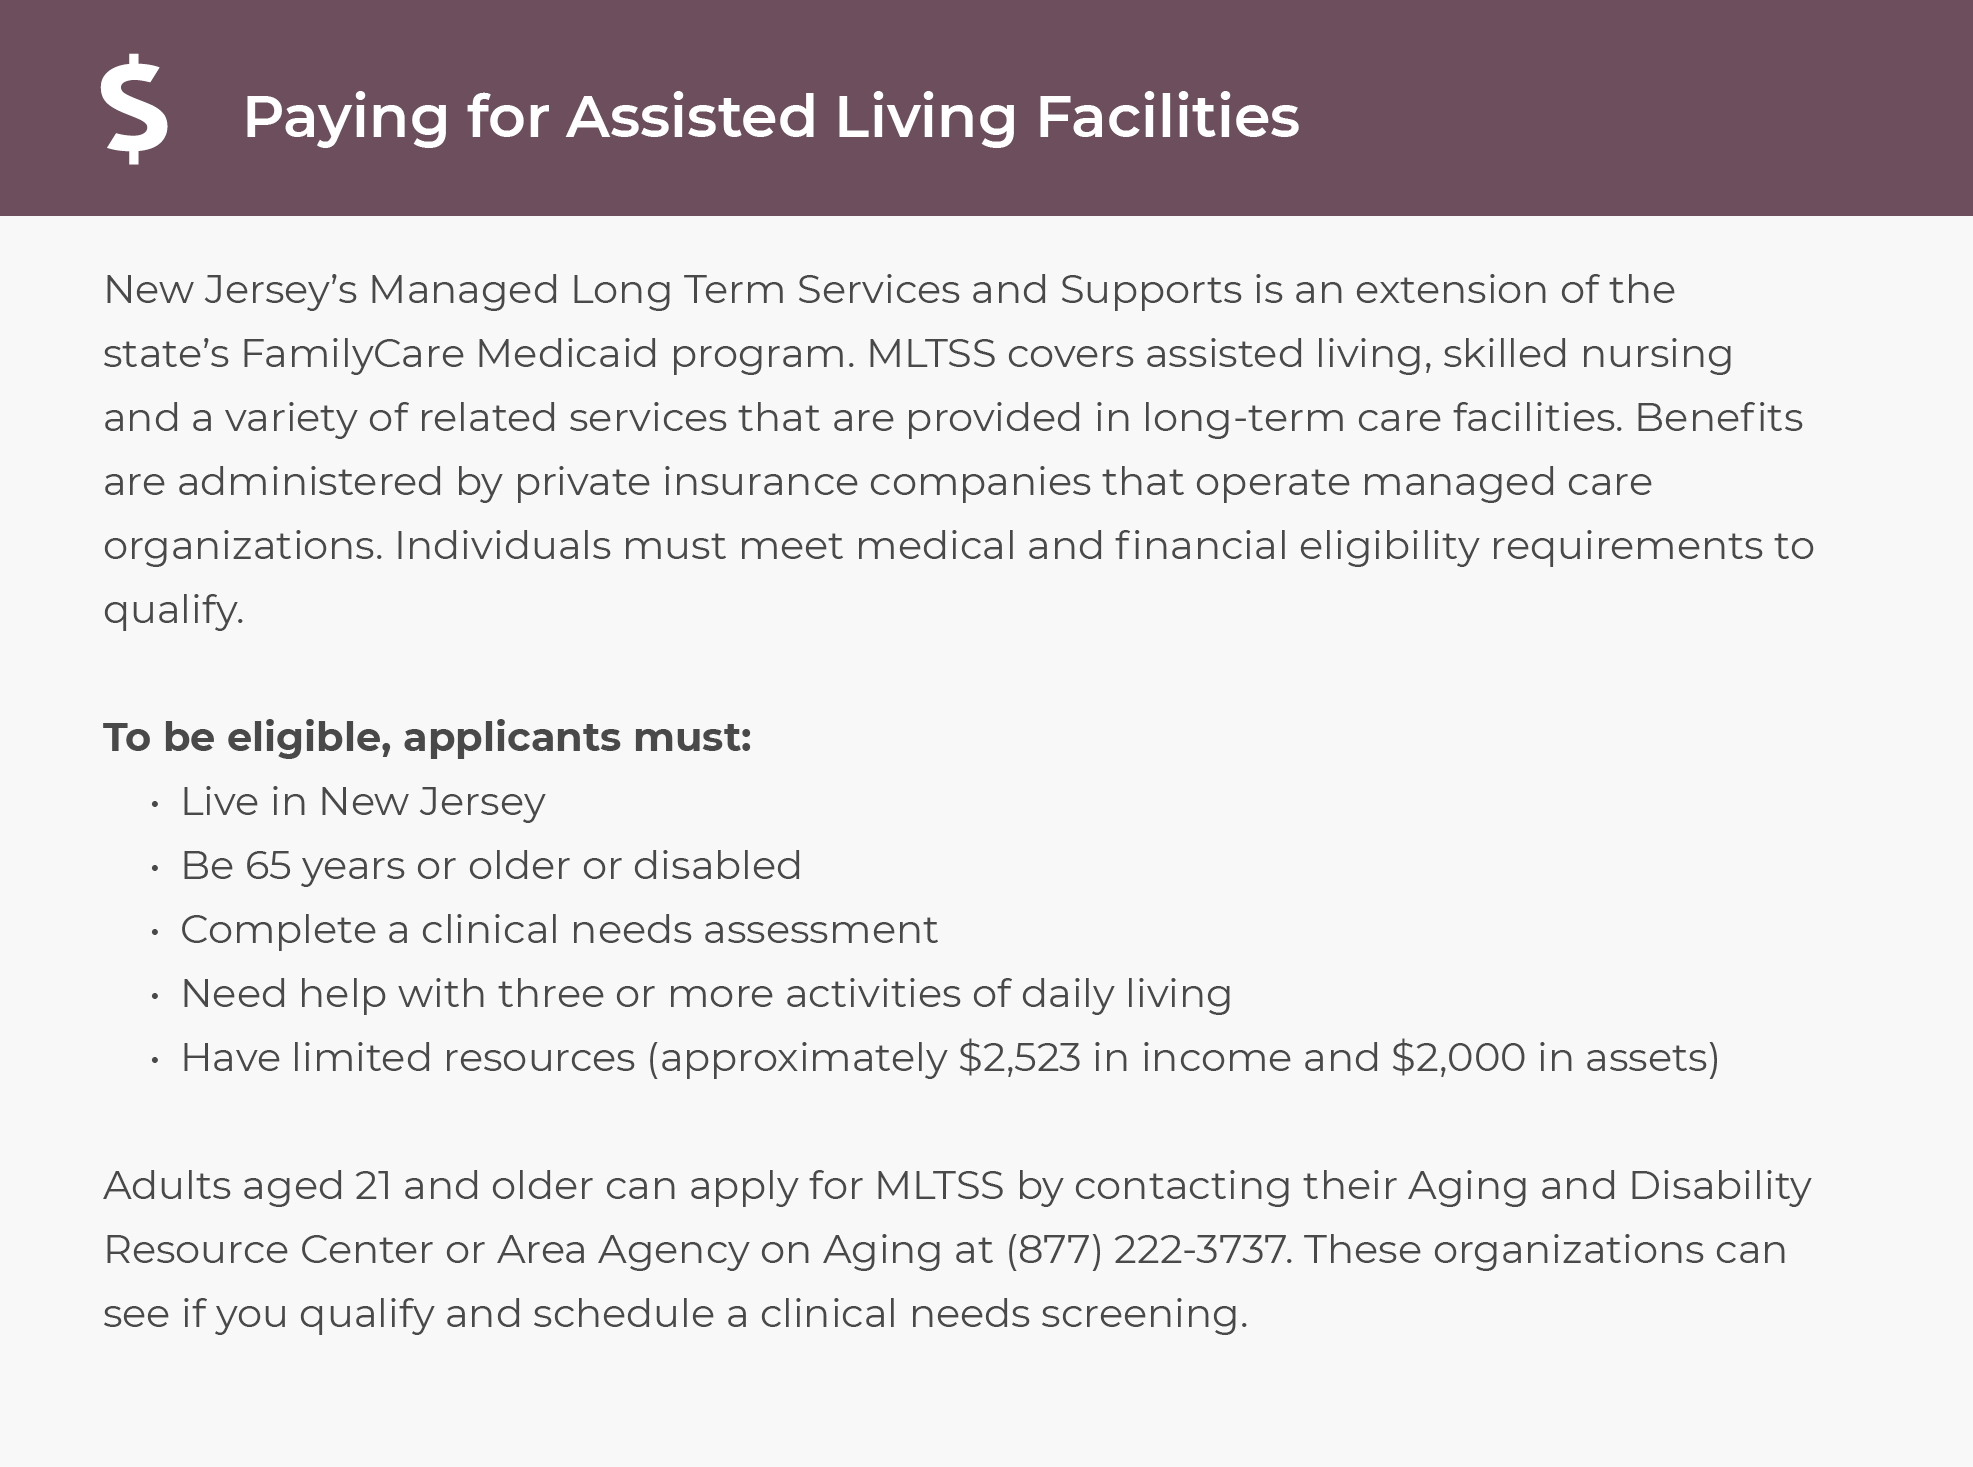 How to Get Financial Assistance for Assisted Living in NJ